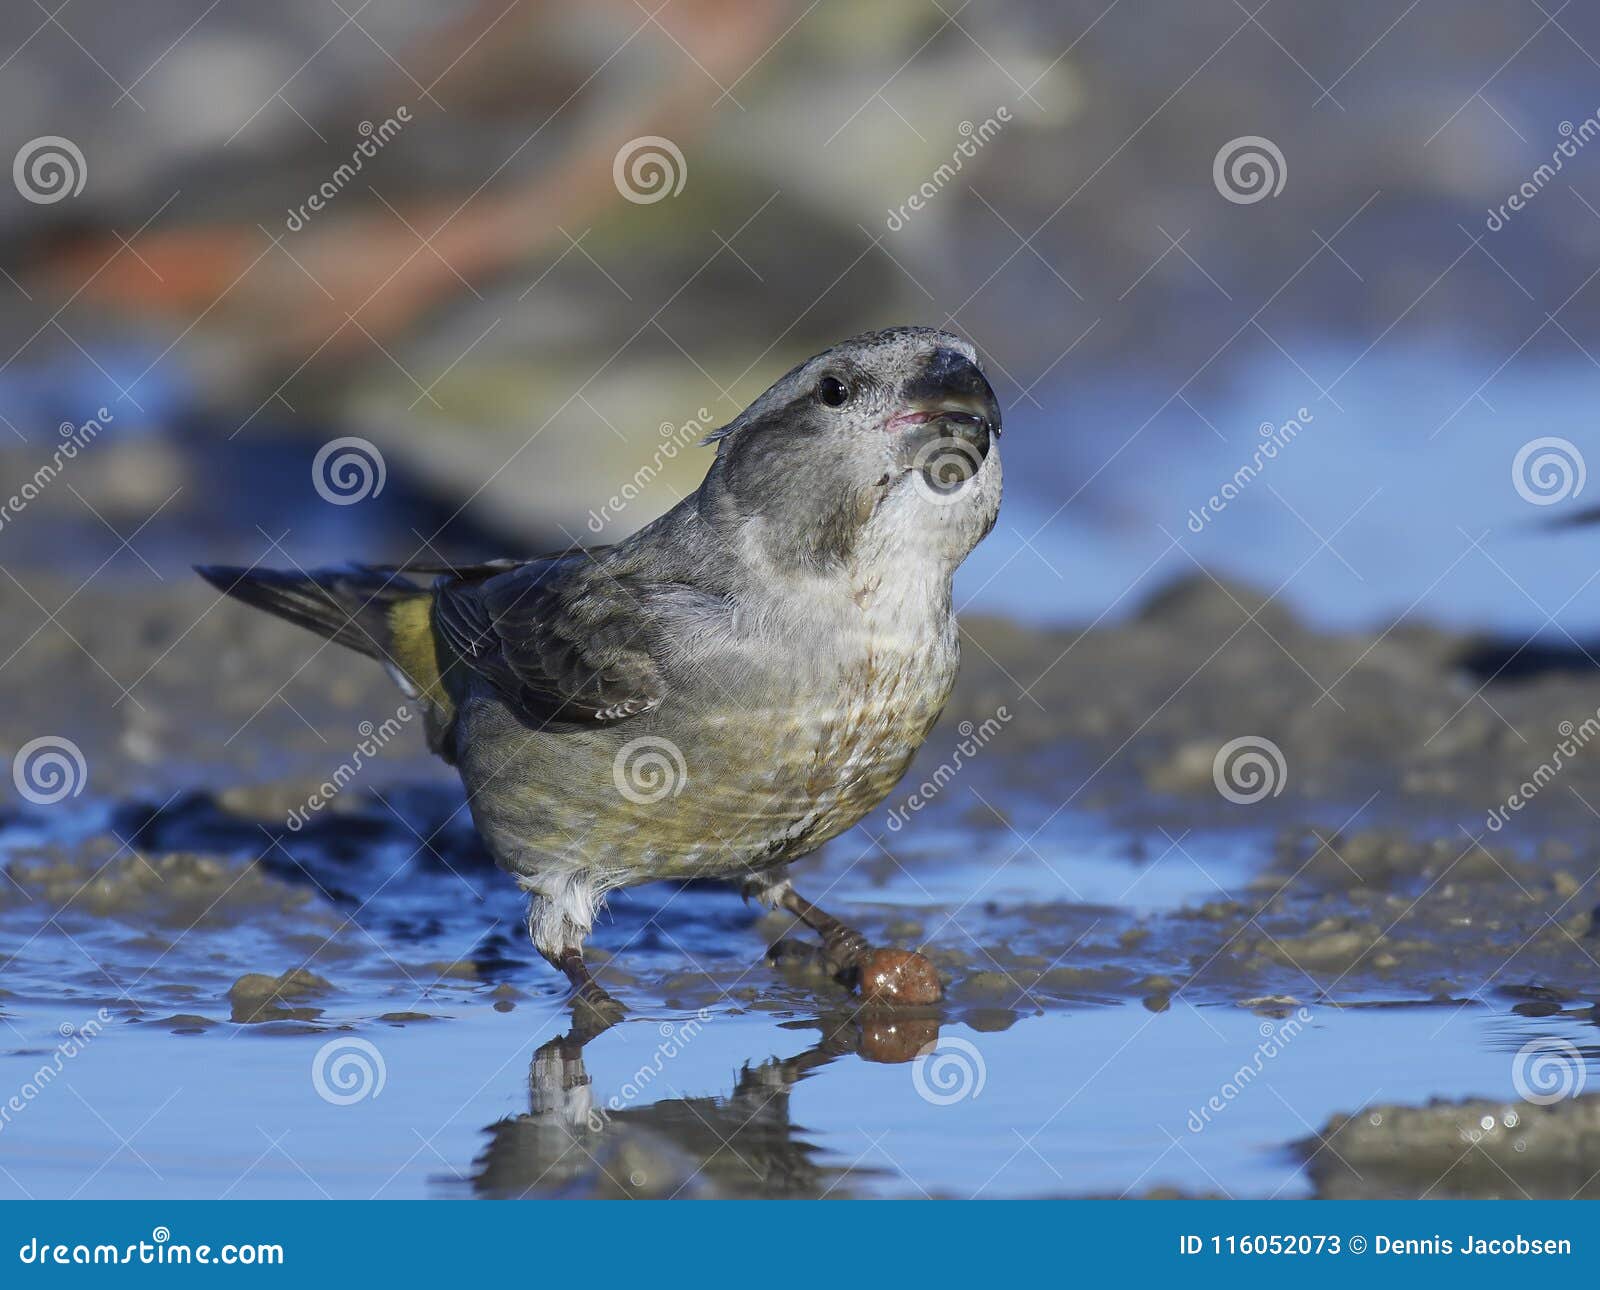 Parrot Crossbill Loxia Pytyopsittacus Stock Image - Image of crossbill ...